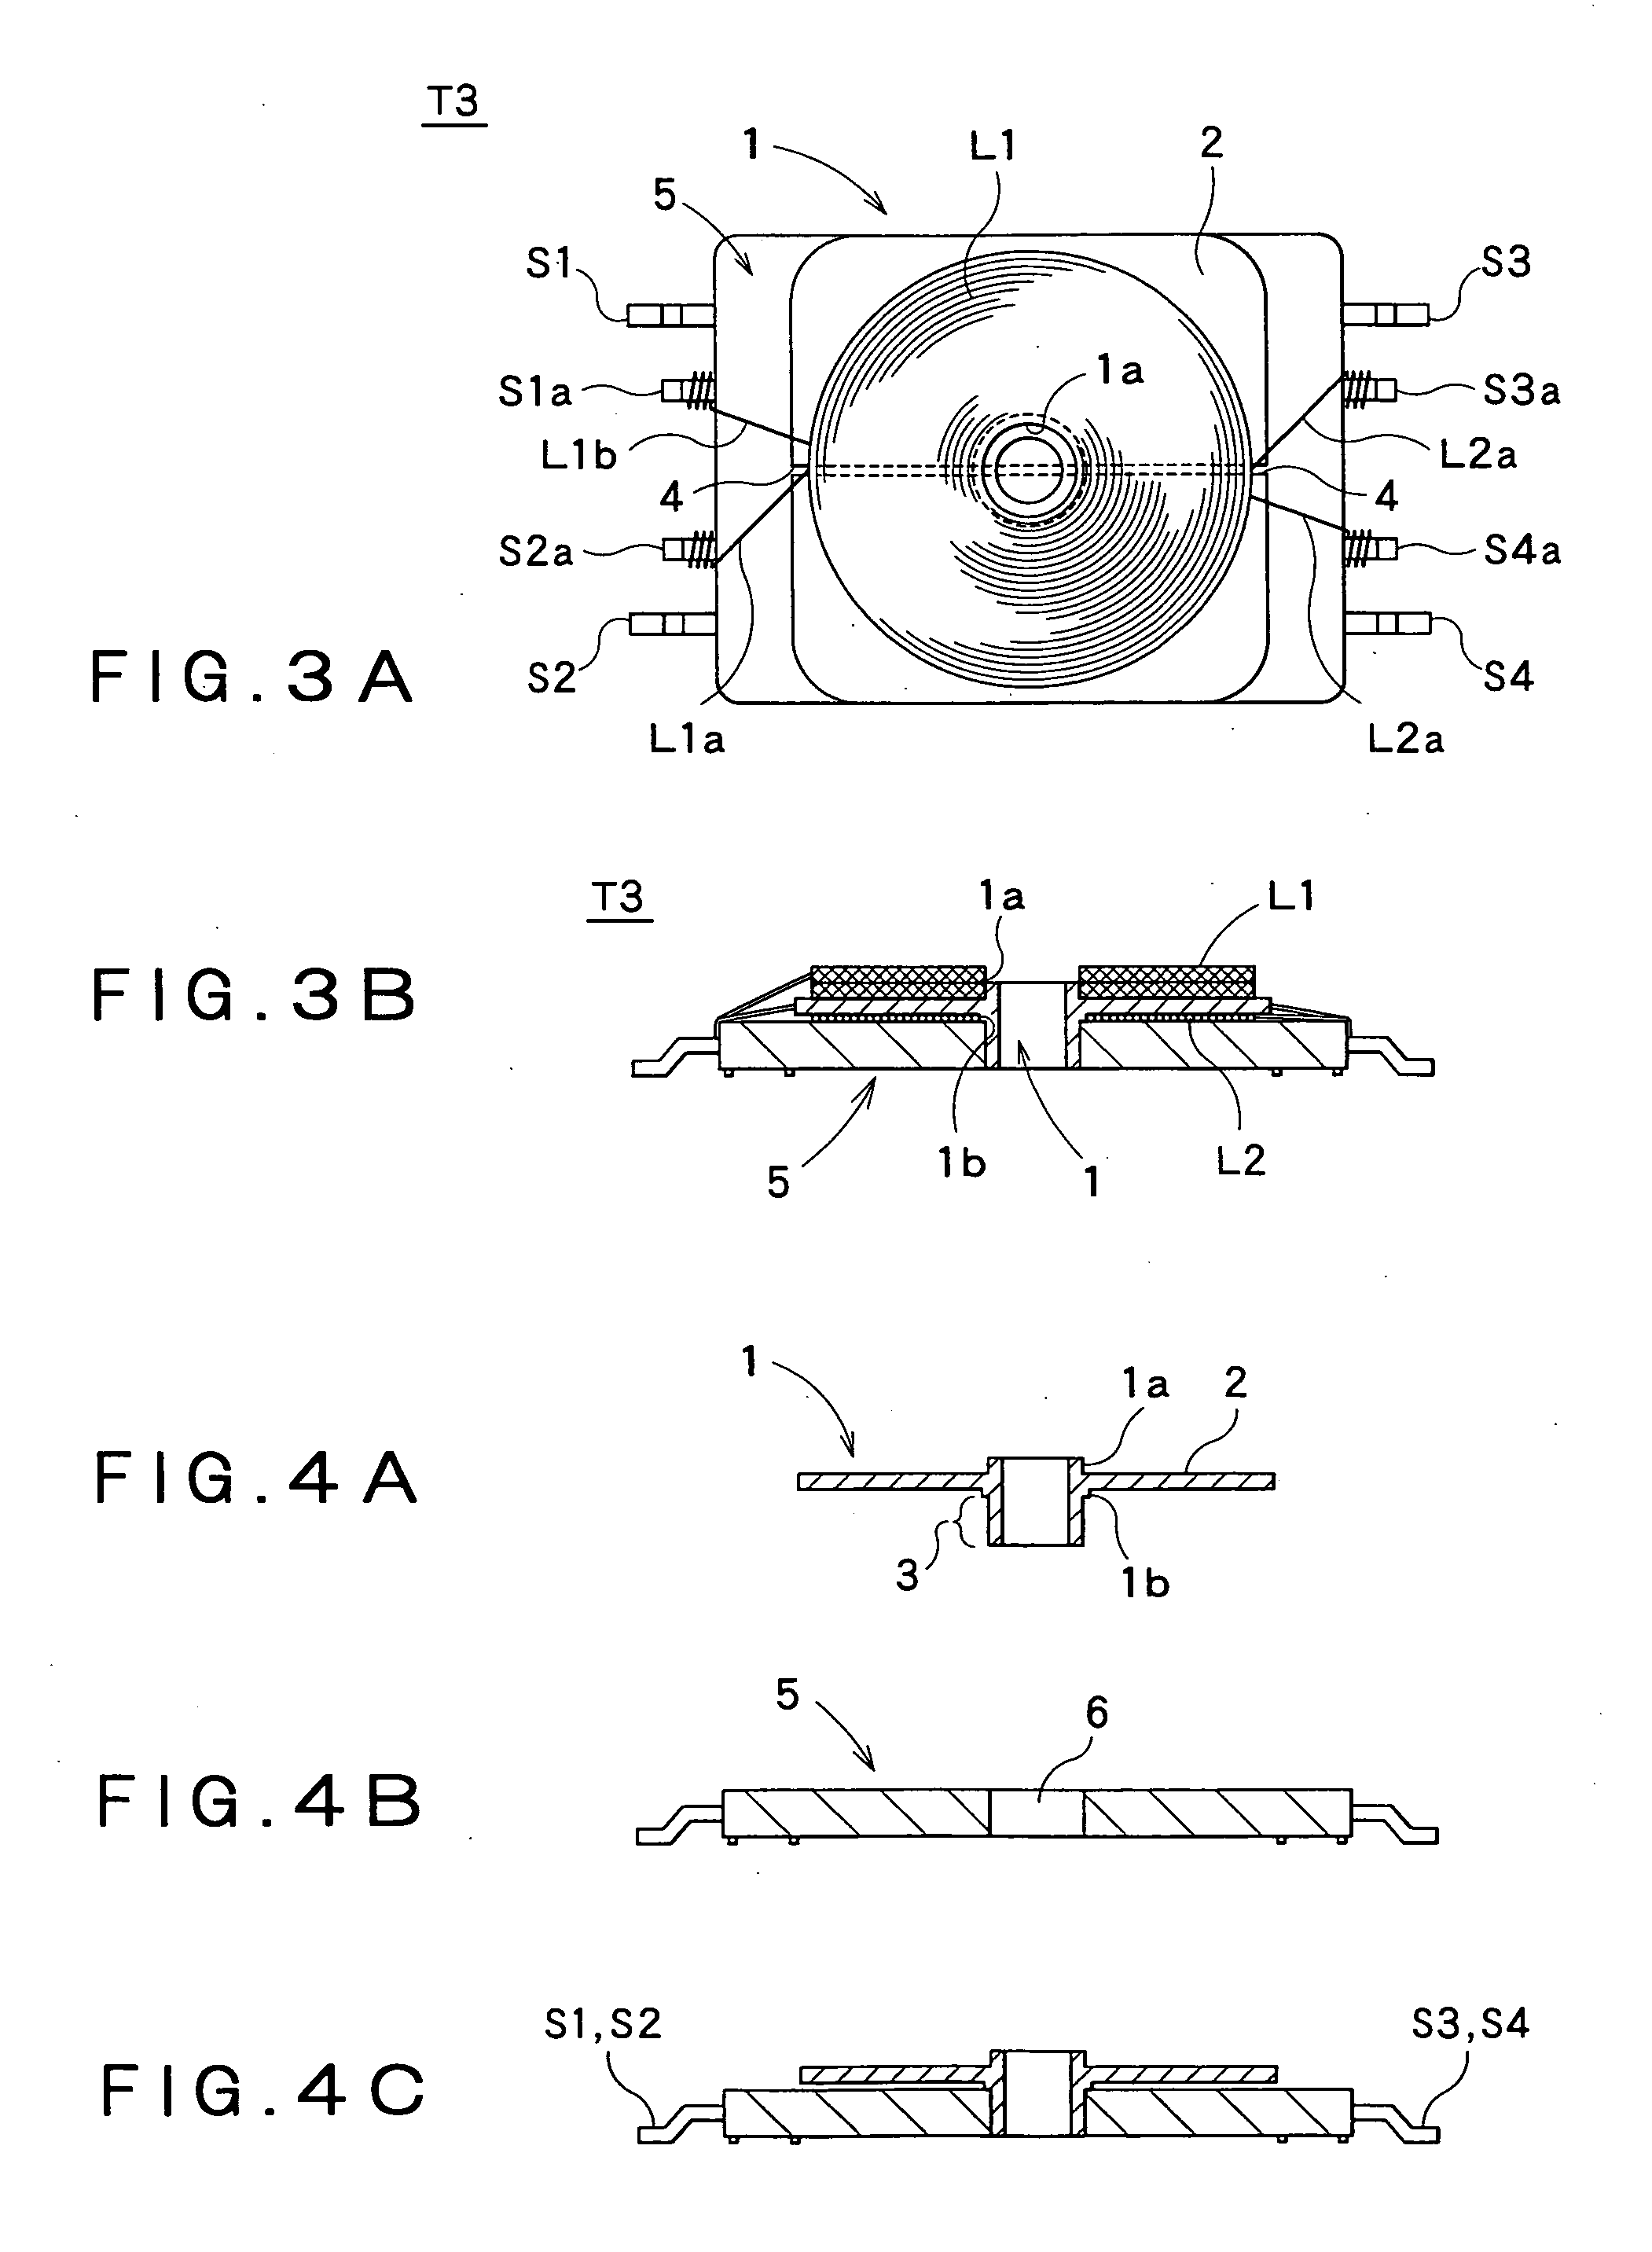 Power transmission transformer for noncontact power transfer device